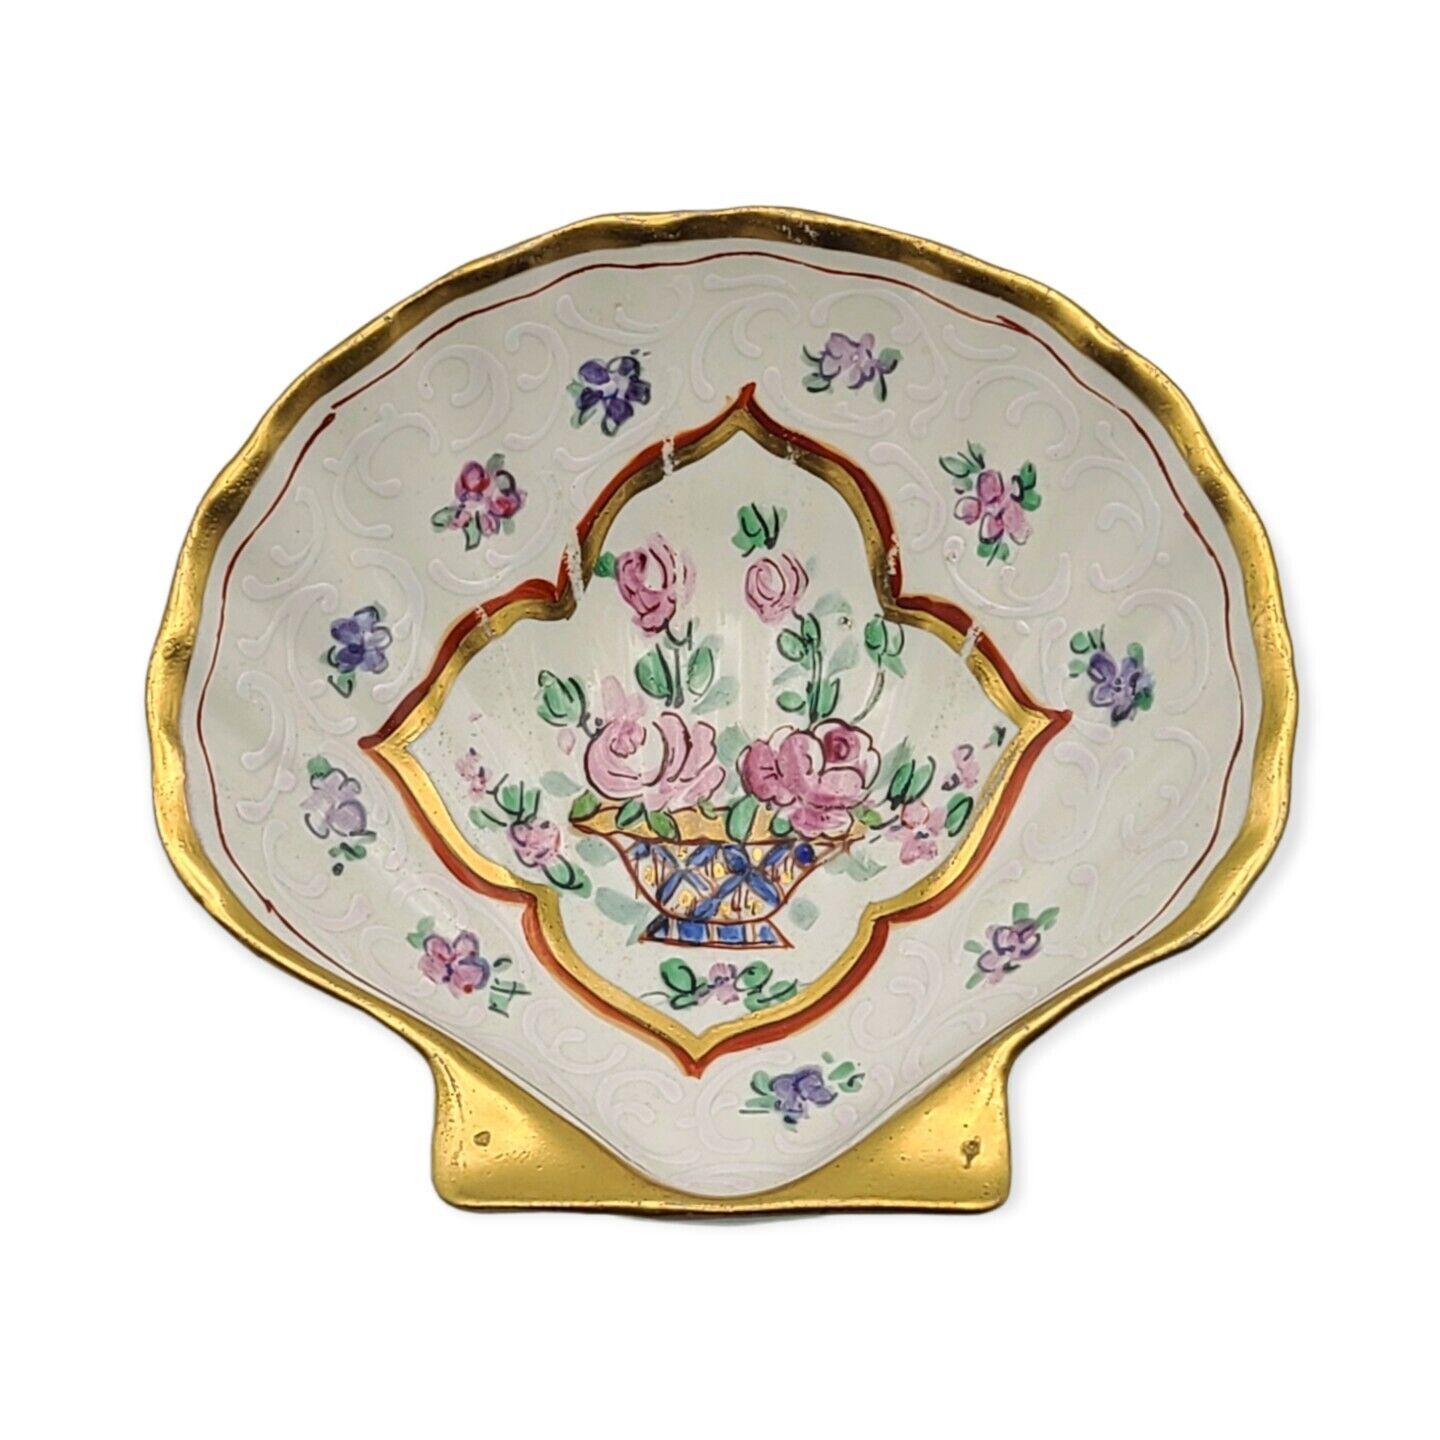 Vtg French Amogee Shell Trinket Dish Ashtray Hand Painted Porcelain Gold Floral